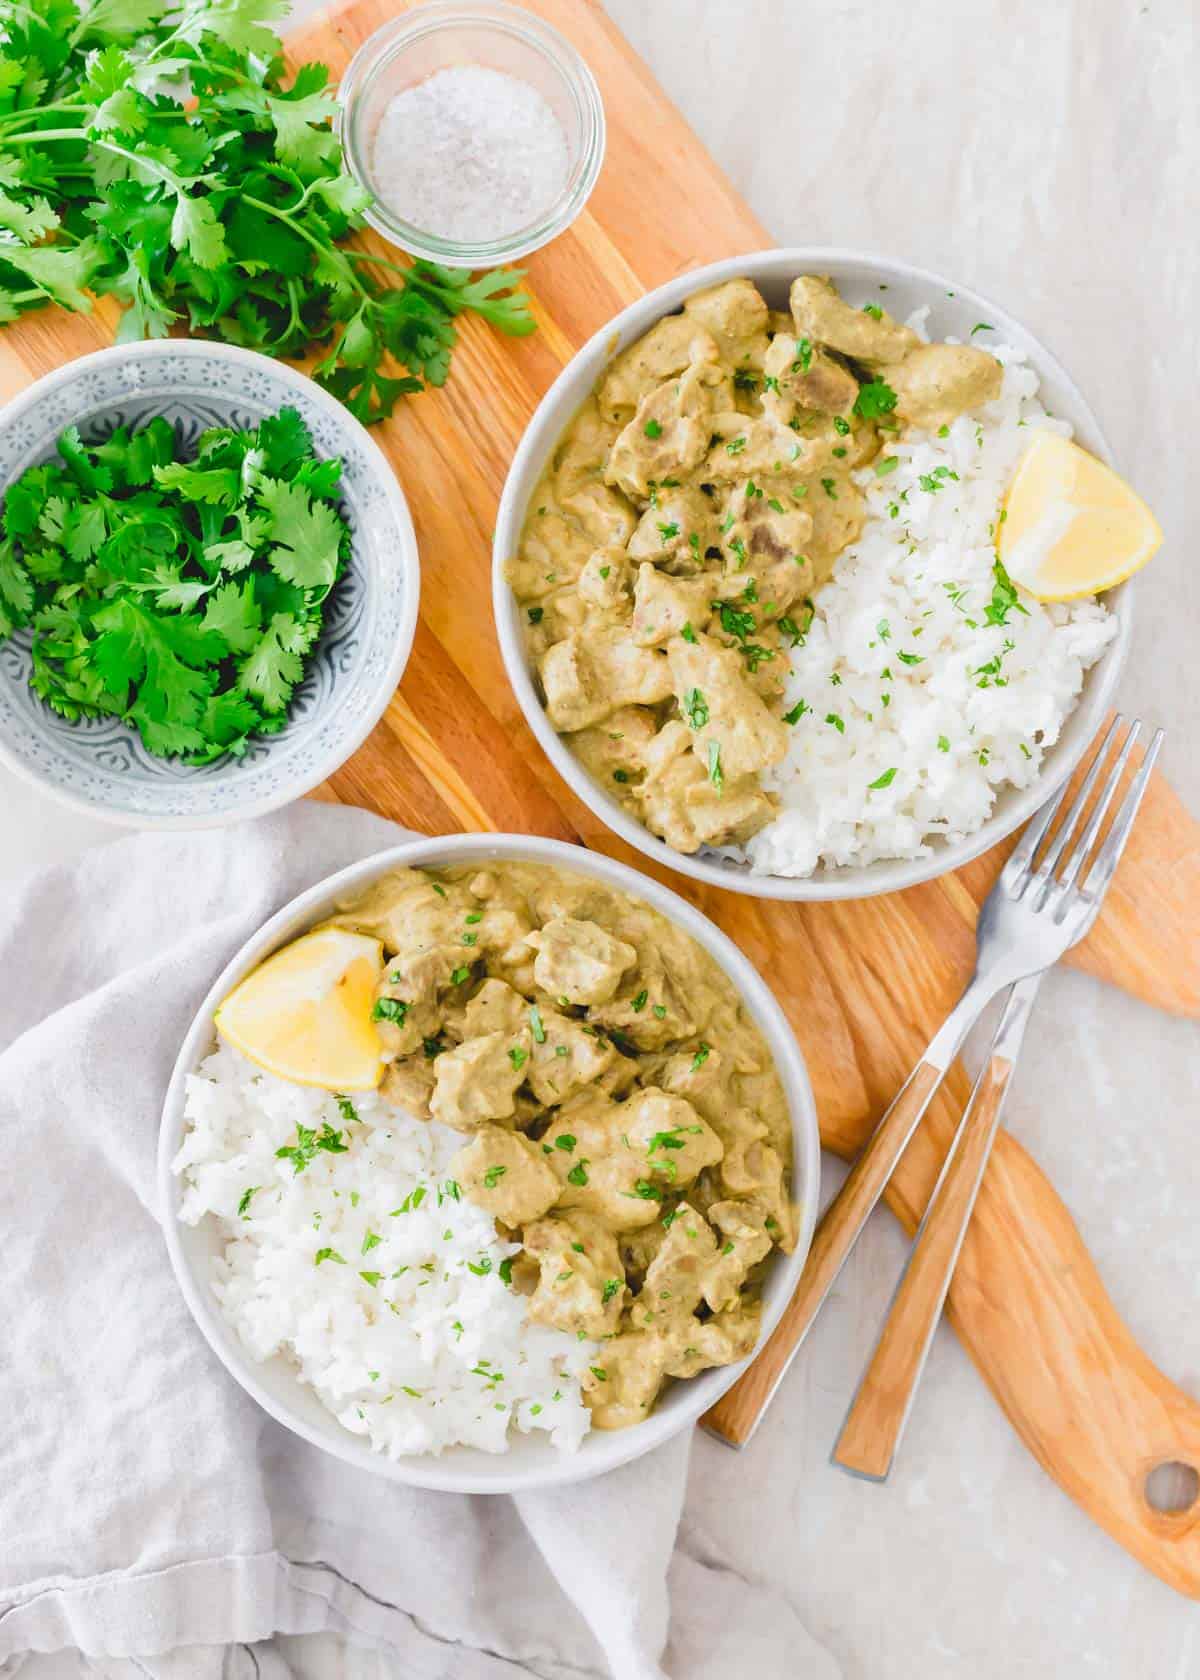 Lamb korma made with tender pieces of lamb leg and a creamy cashew based sauce.